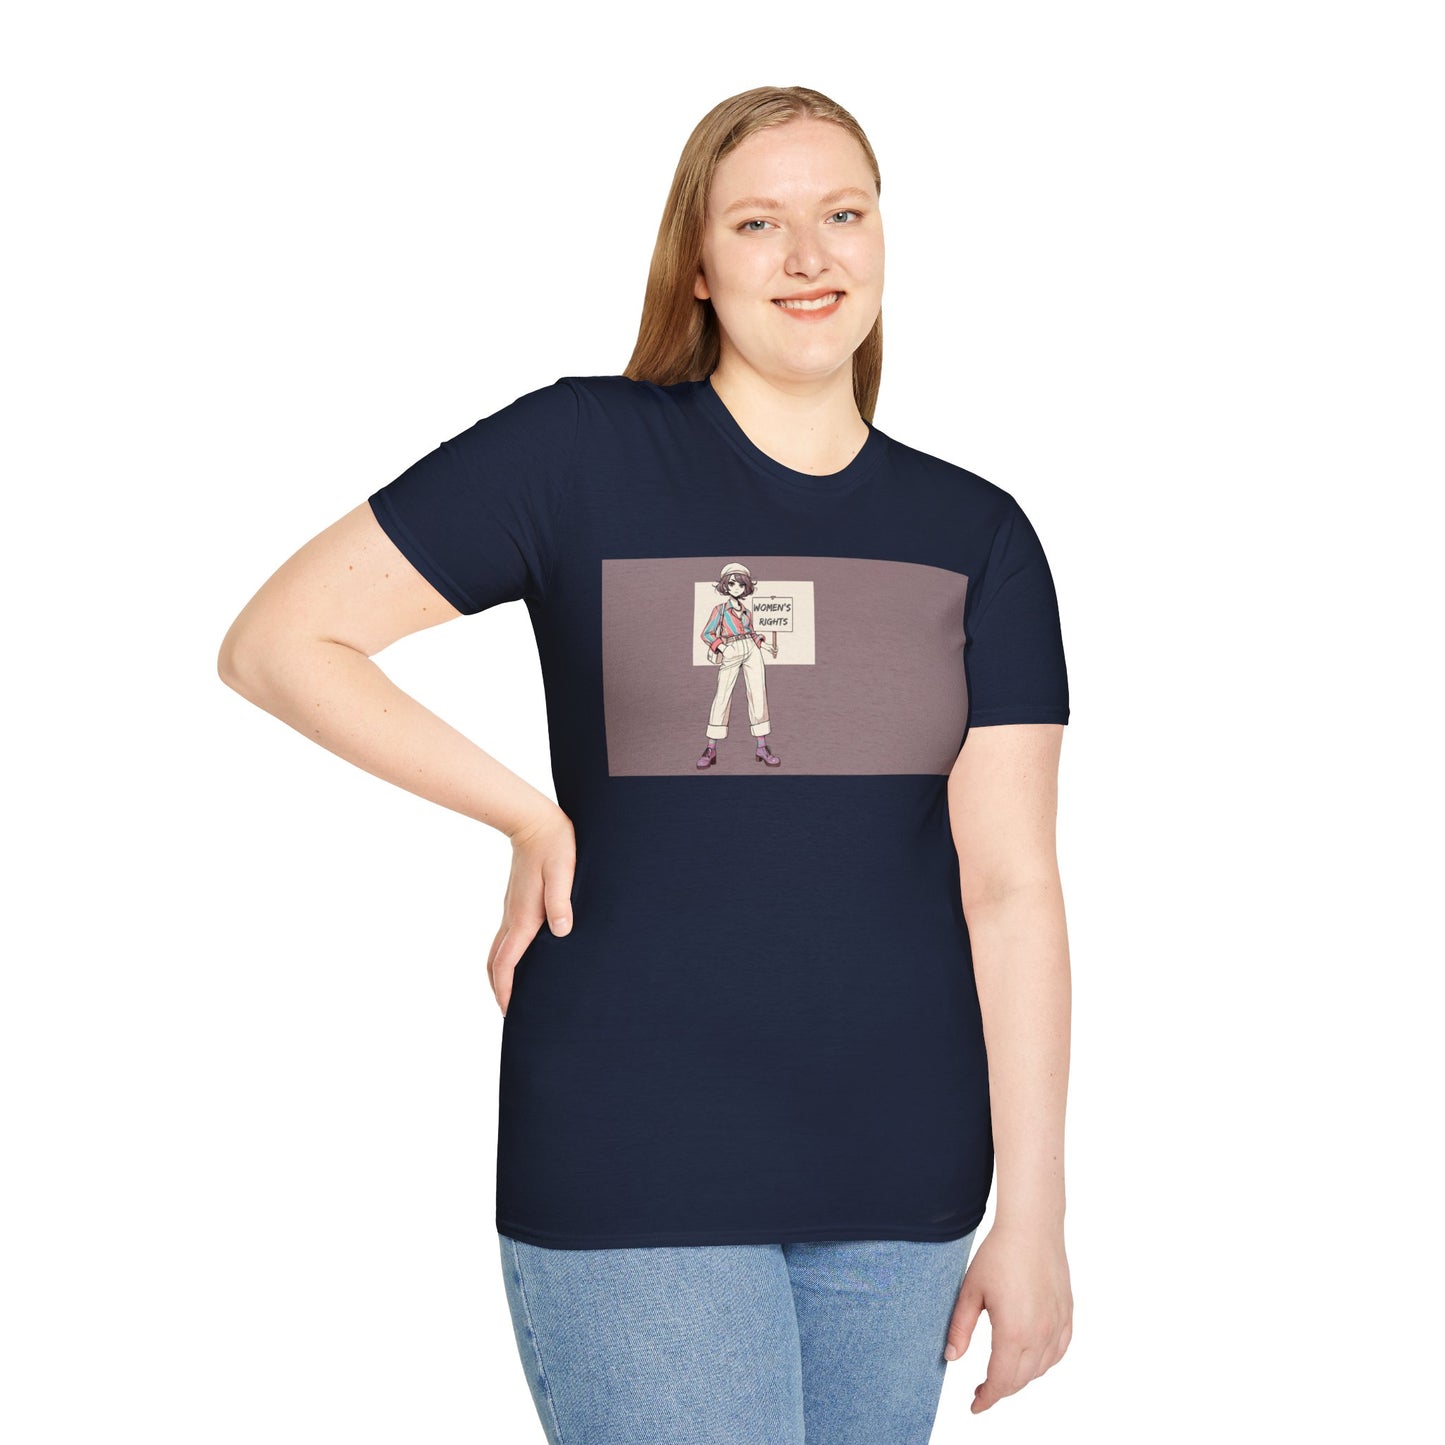 Women's Rights! Bold Uncompromising Statement Soft Style t-shirt |unisex| Chic Activism, Protest Oppression, Demand Equality!